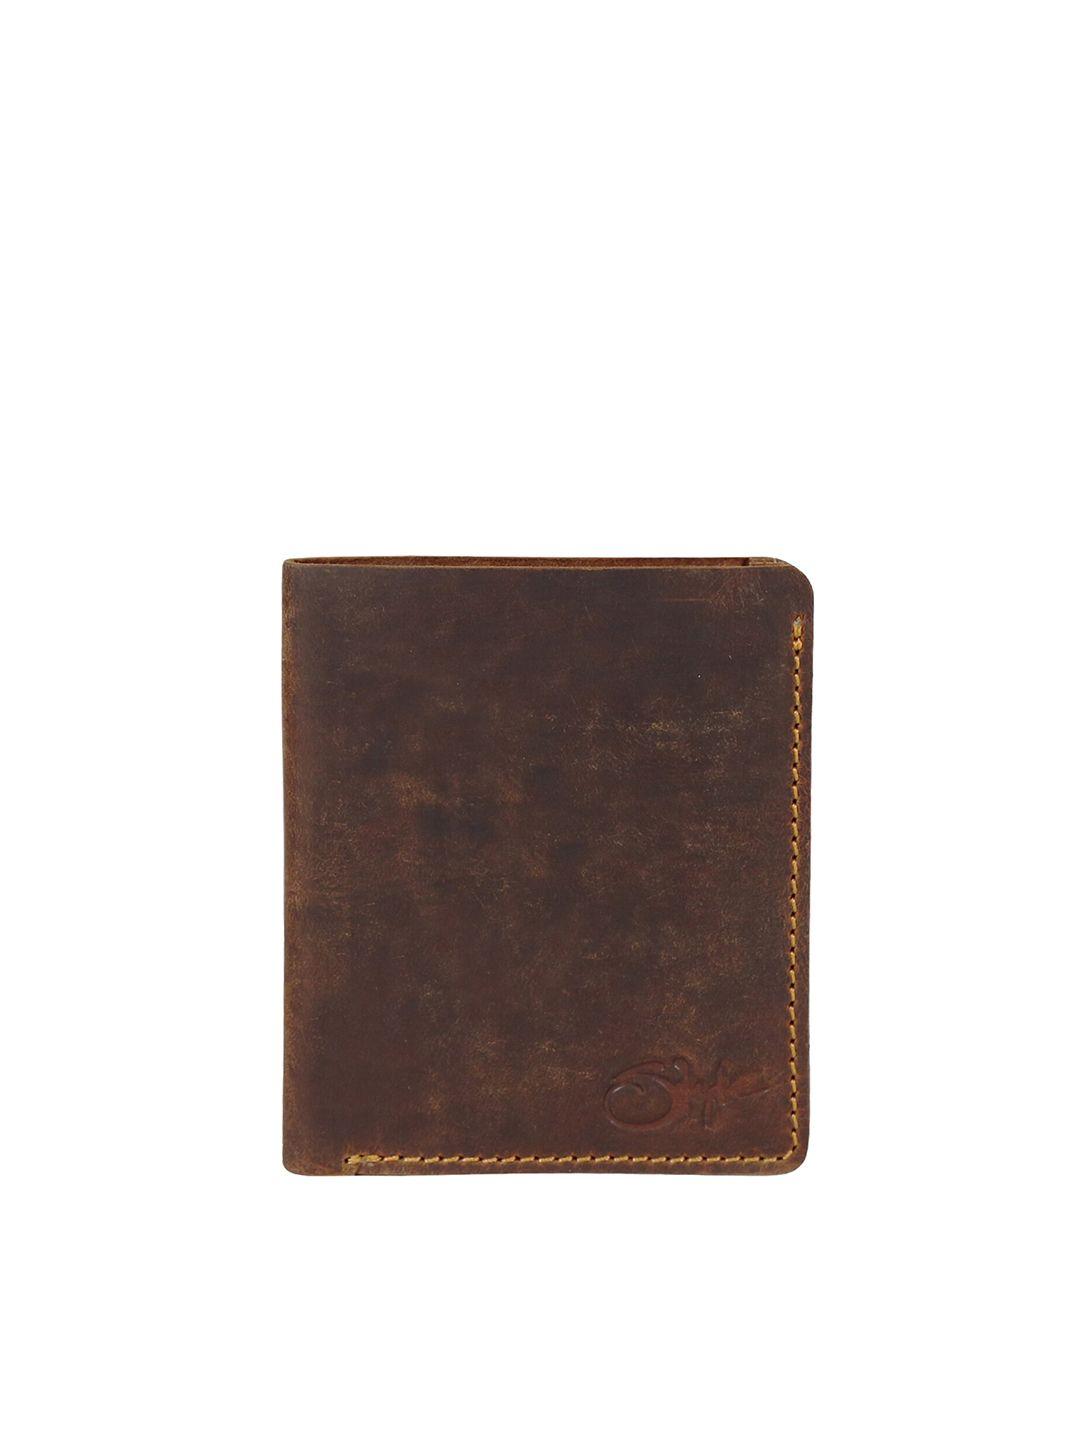 style shoes men brown textured leather two fold wallet